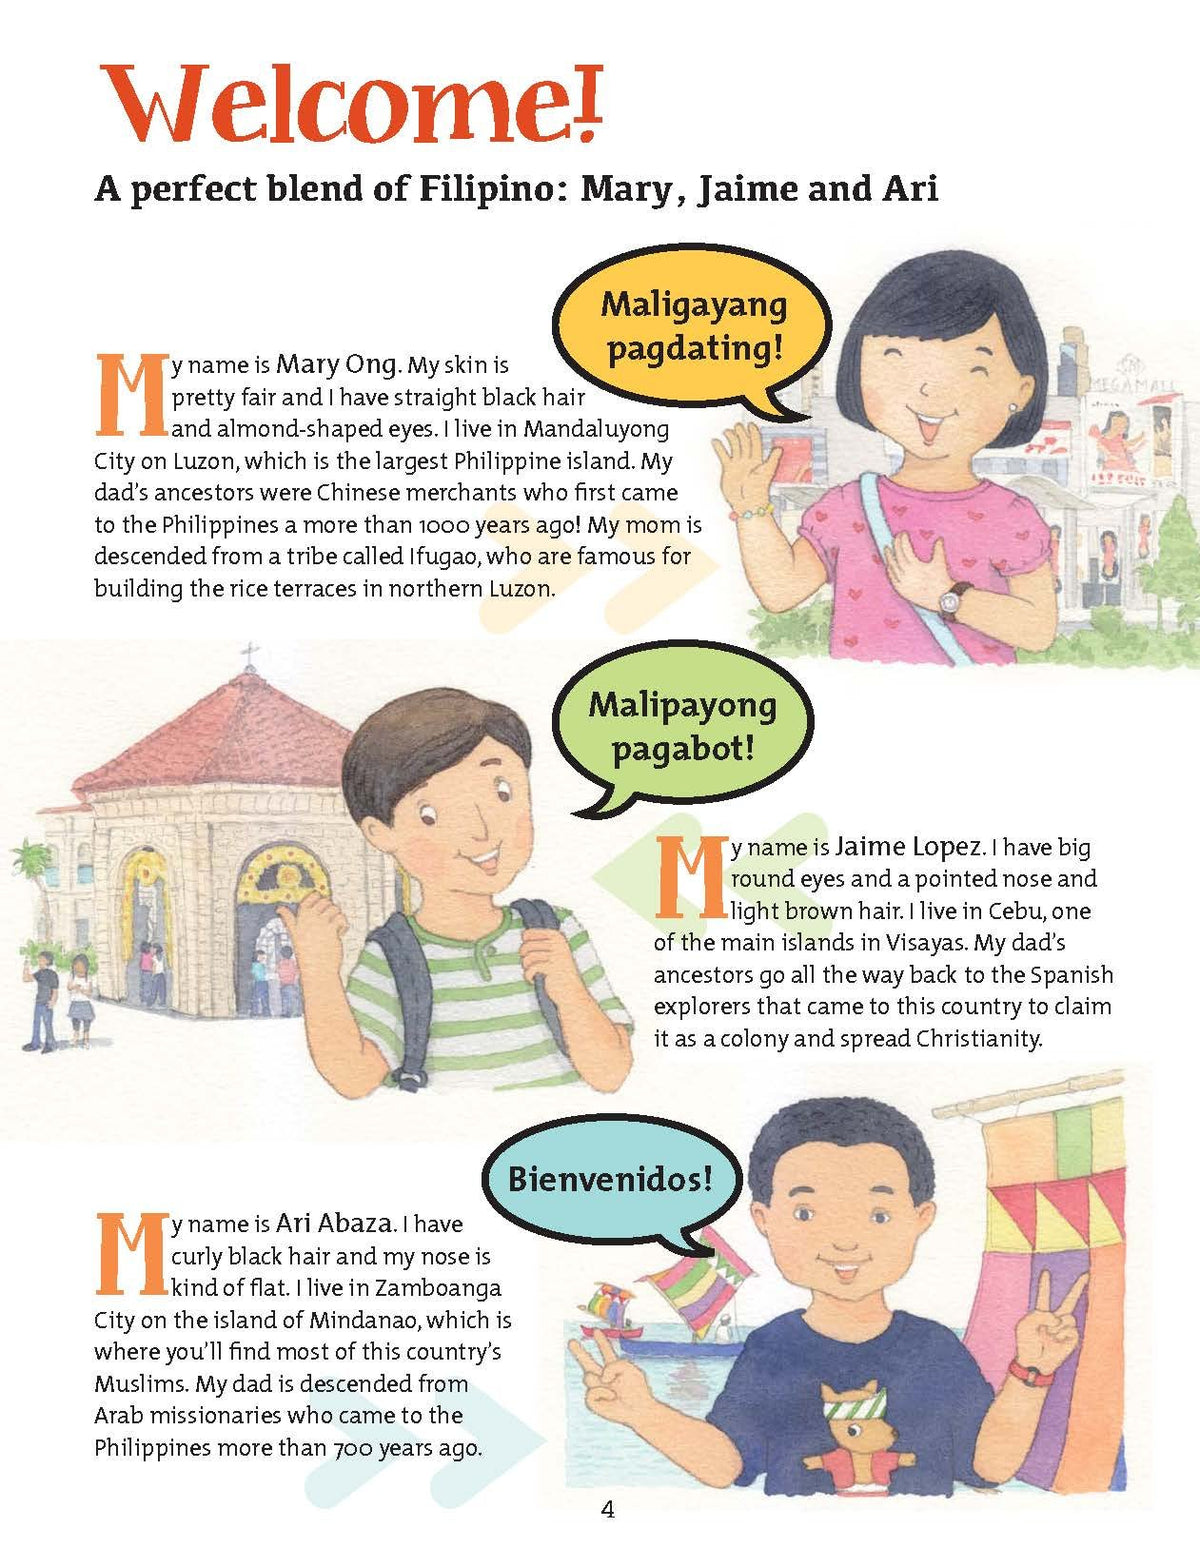 All About the Philippines: Stories, Songs, Crafts and Games for Kids